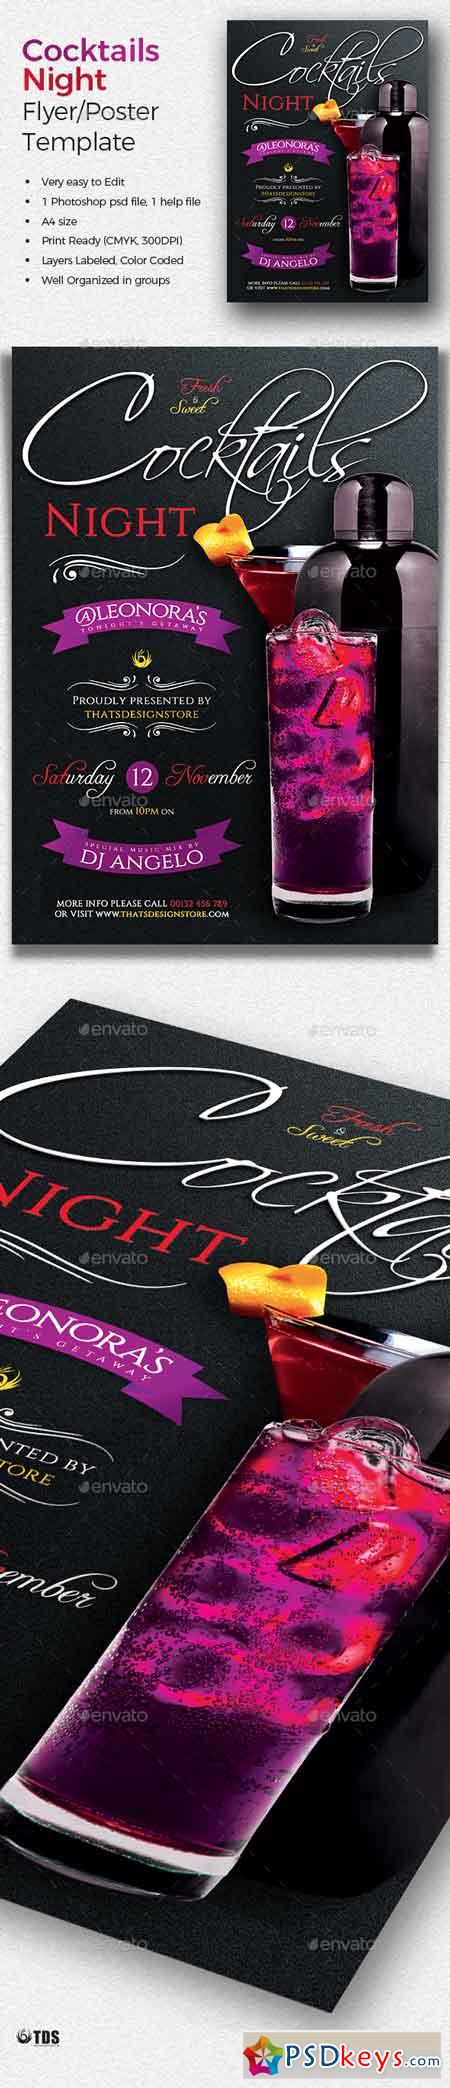 Cocktails Night Flyer Template 19670540